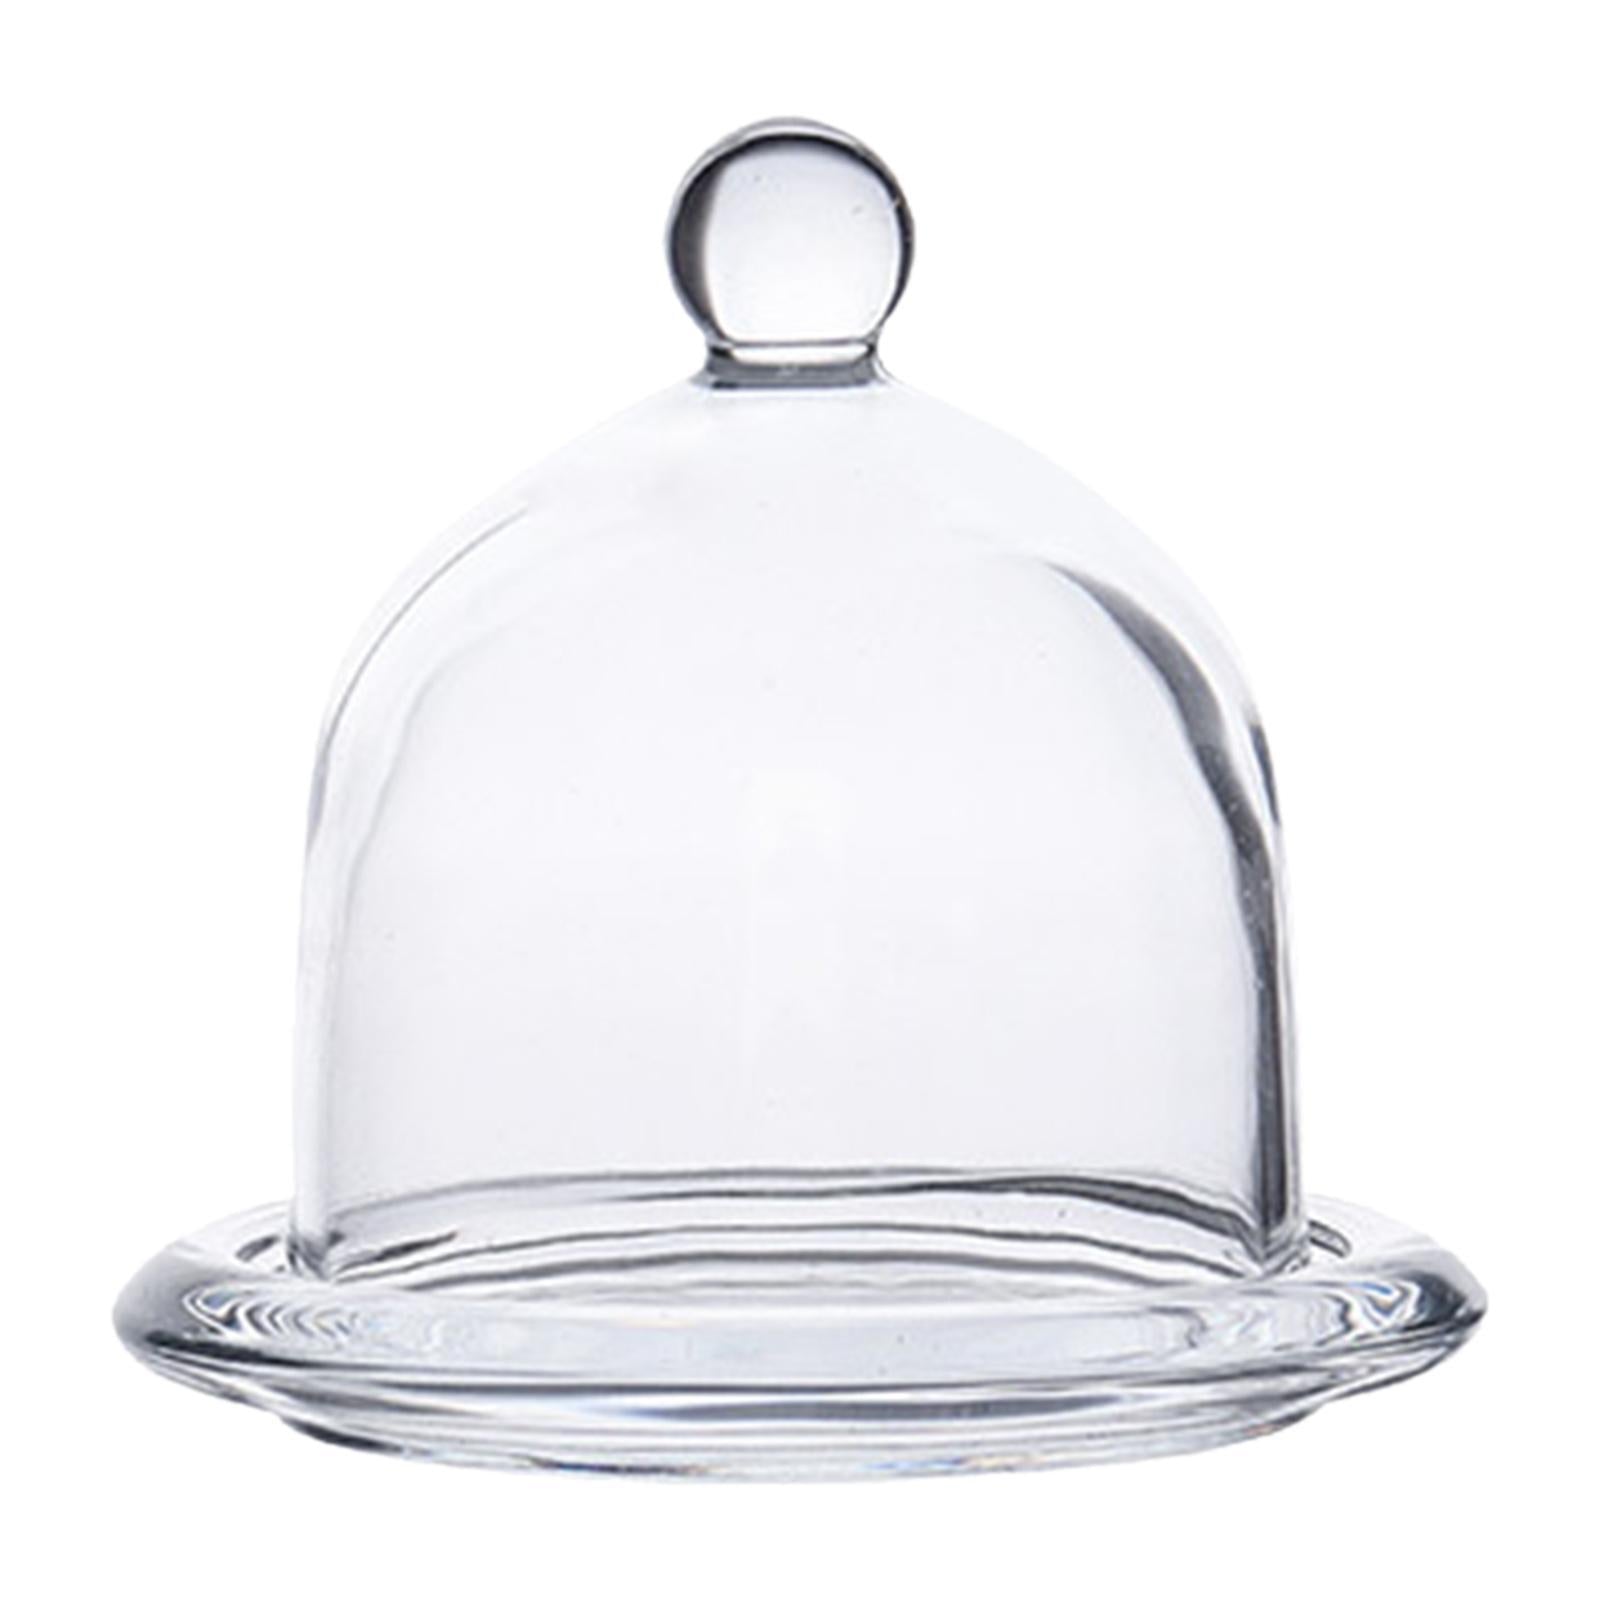 Patisserie Cupcake Mini Glass Cake Dome 12.5x11.cm with Serving Base Tray 34562